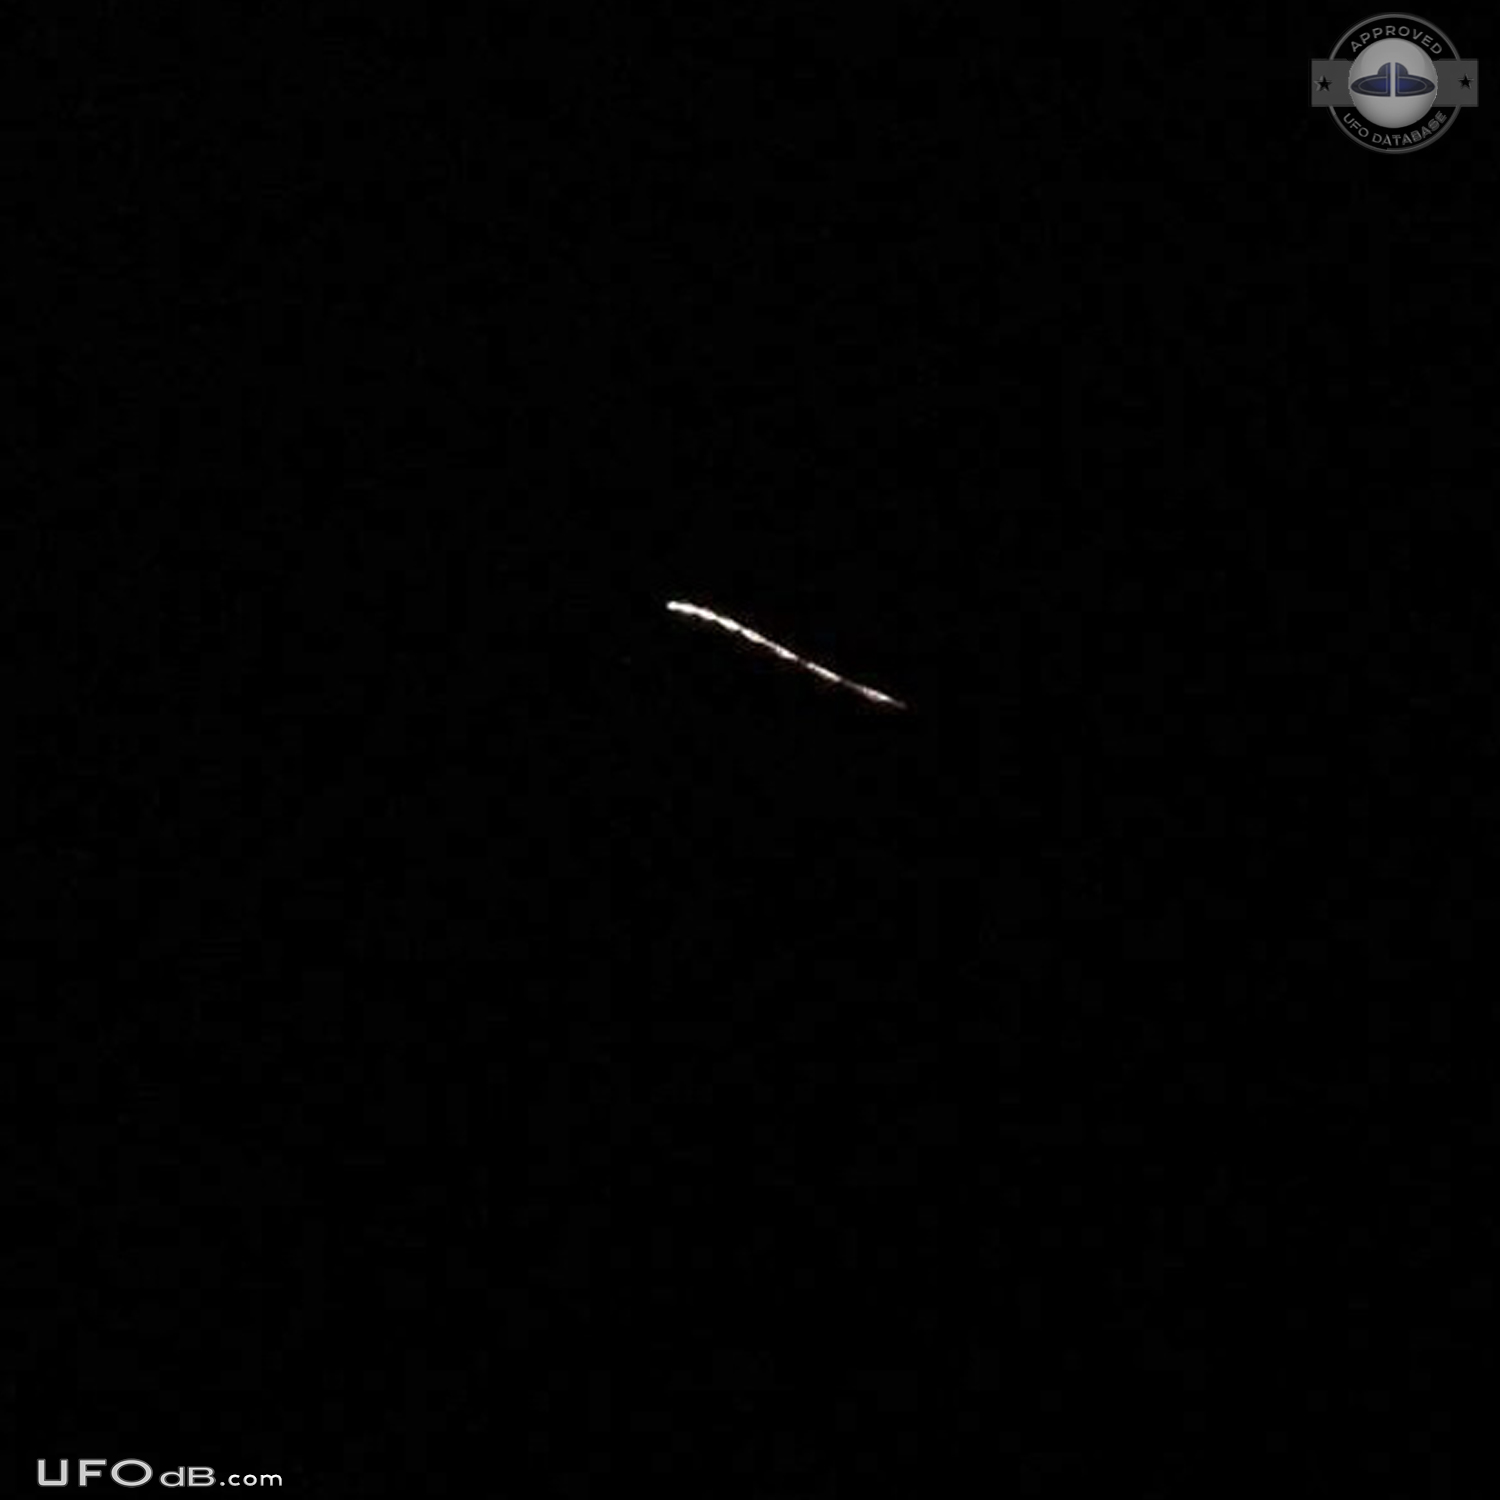 4 moving lights seen over Wheatland Wyoming USA 2015 UFO Picture #583-2